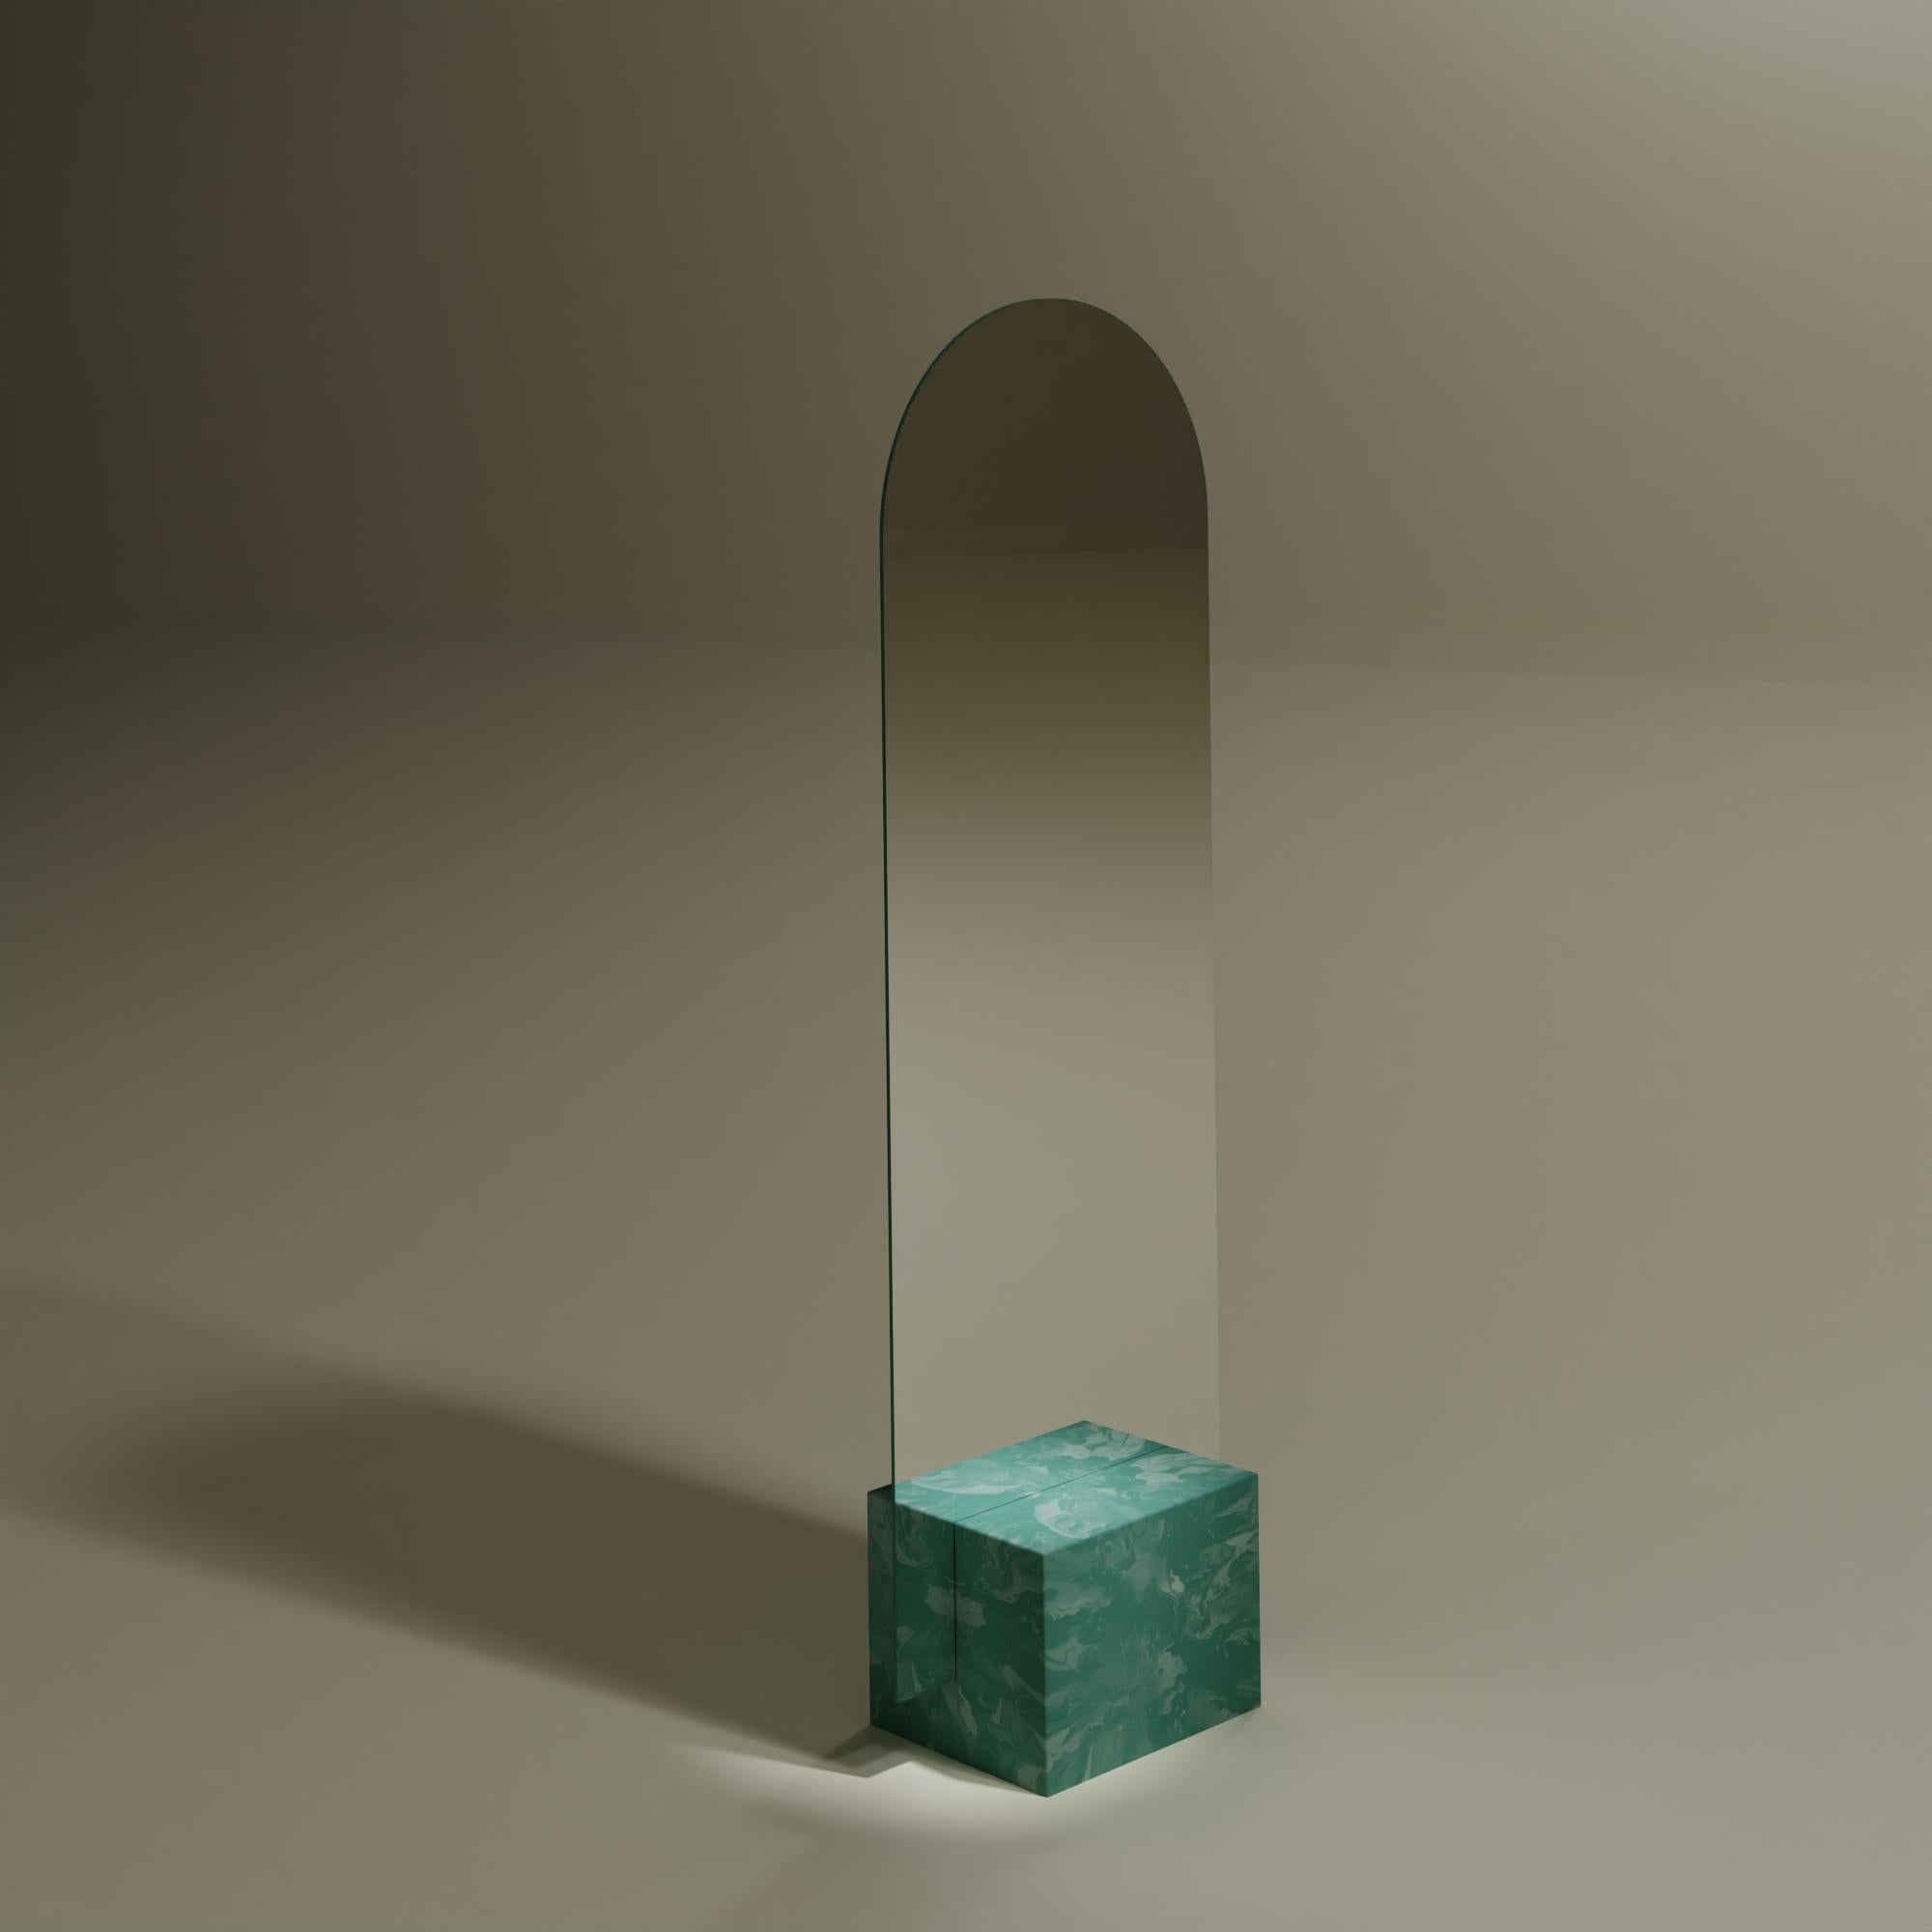 Contemporary green standing mirror handcrafted from 100% recycled plastic by Anqa Studios.
With its stone-like bottom and the fragile seeming top part silhouette, the ANQA Moonrise mirror is a modern confluence of both art and function. This